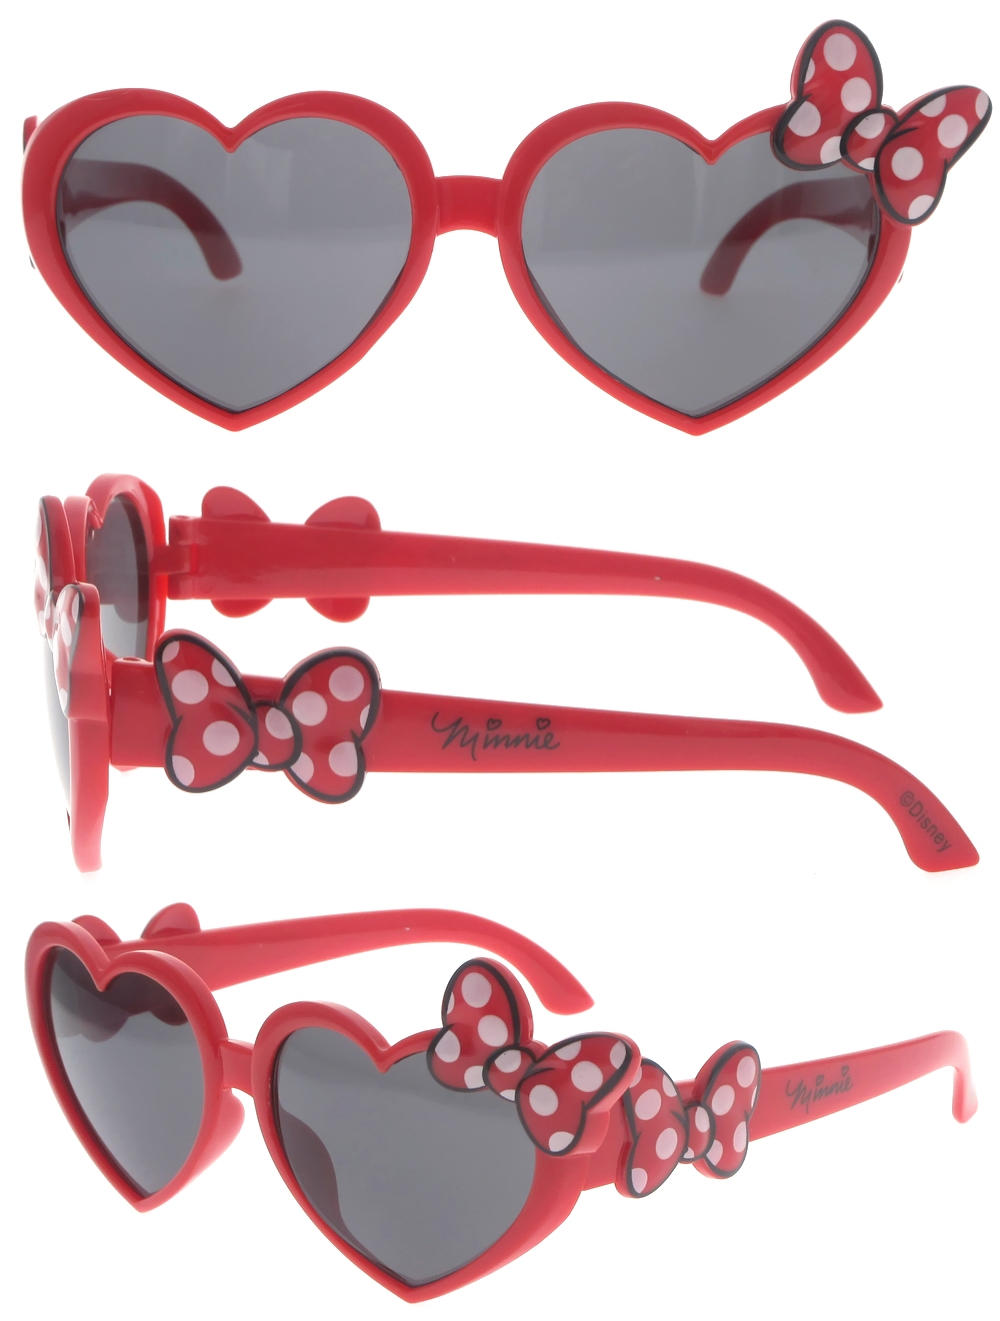 Dachuan Optical DSPK342039 China Manufacture Factory New Trends Heart Shape Kids Sunglasses with Screw Hinge (1)